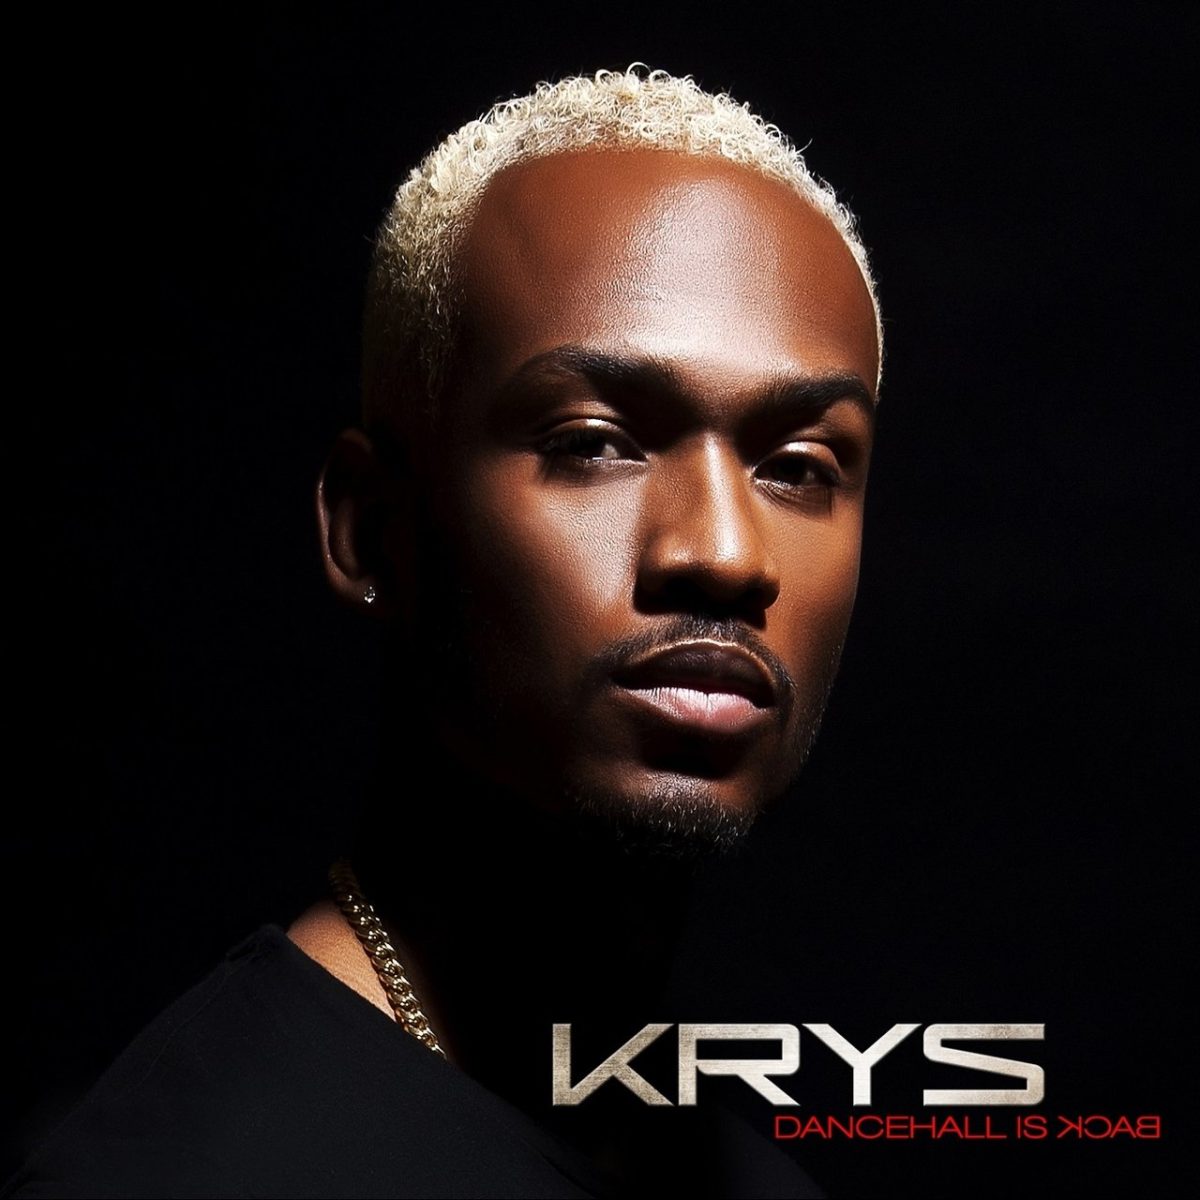 Krys - Dancehall Is Back (Cover)